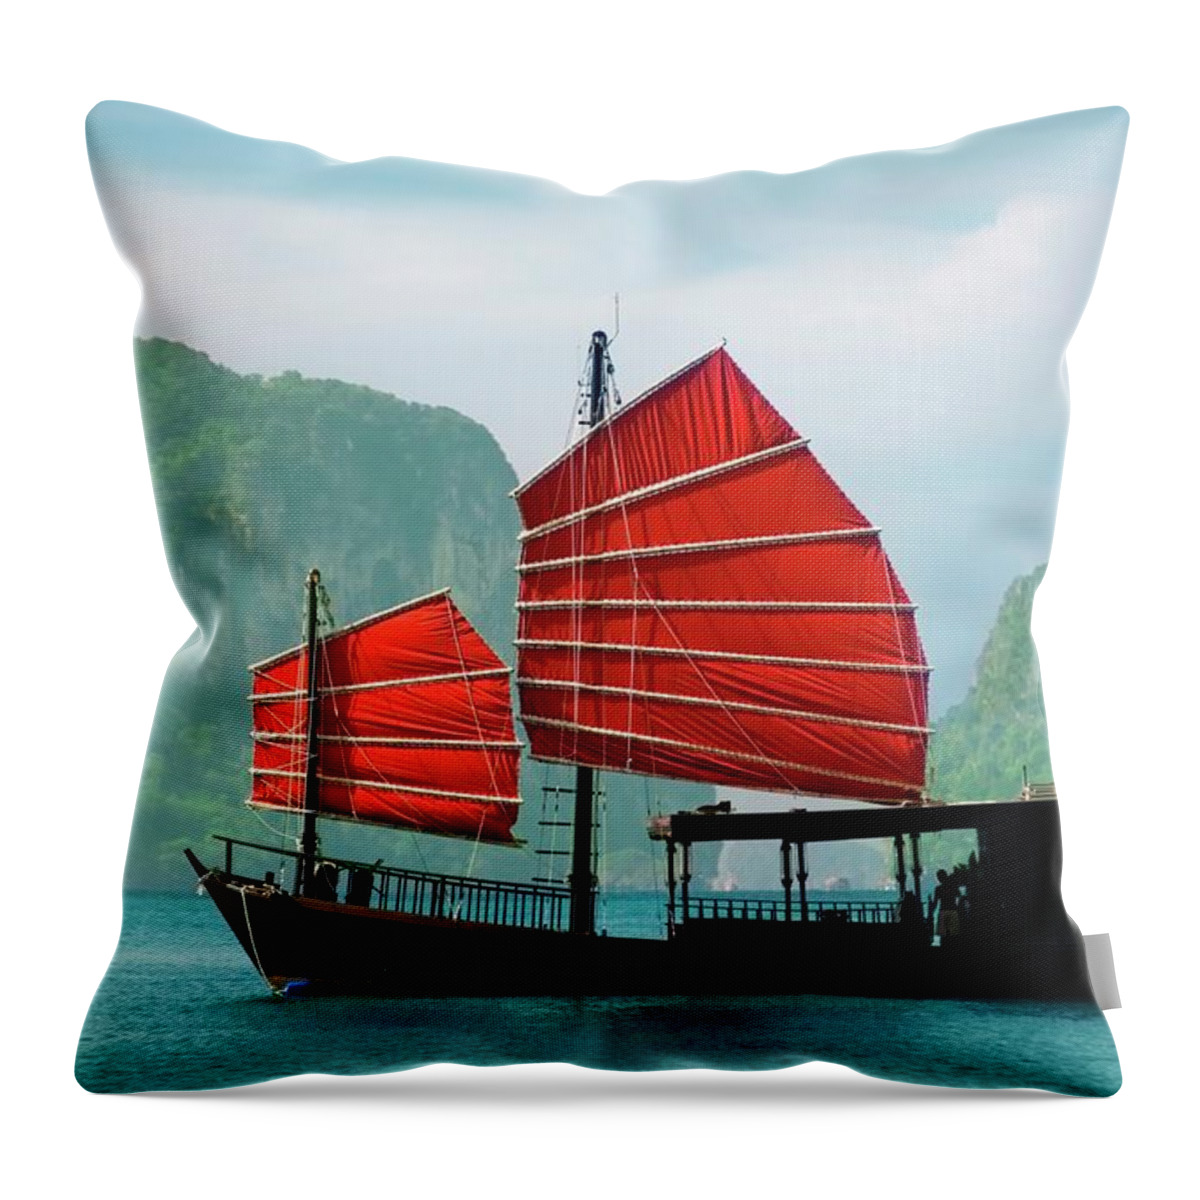 Journey Throw Pillow featuring the photograph Junk Ship With Mountain Island by R9 ronaldo